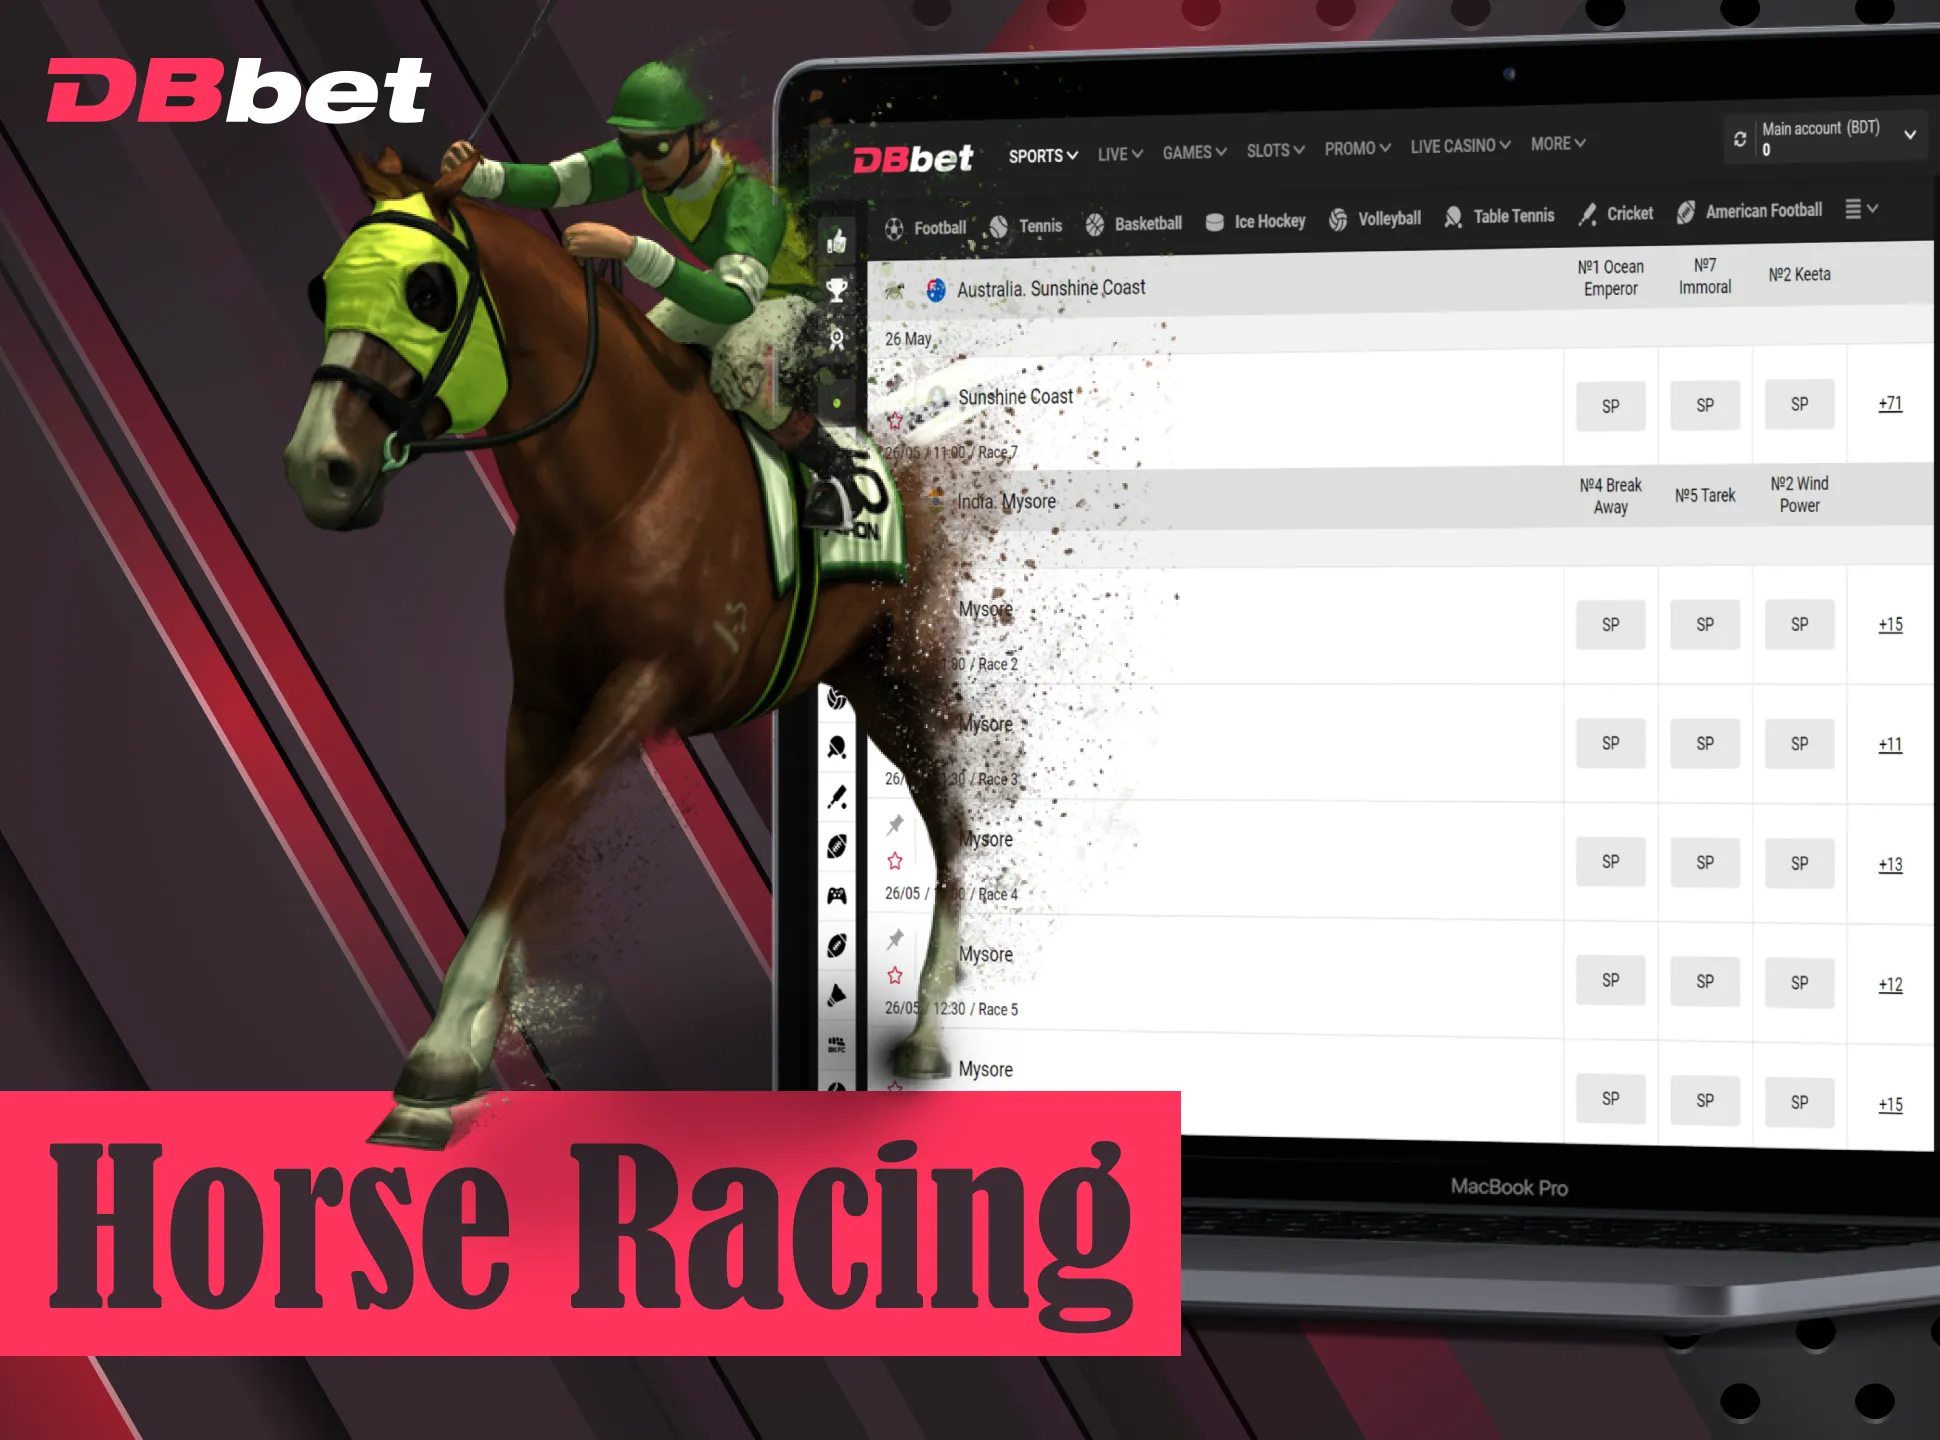 Bet on fastest horse at DBbet and win money.